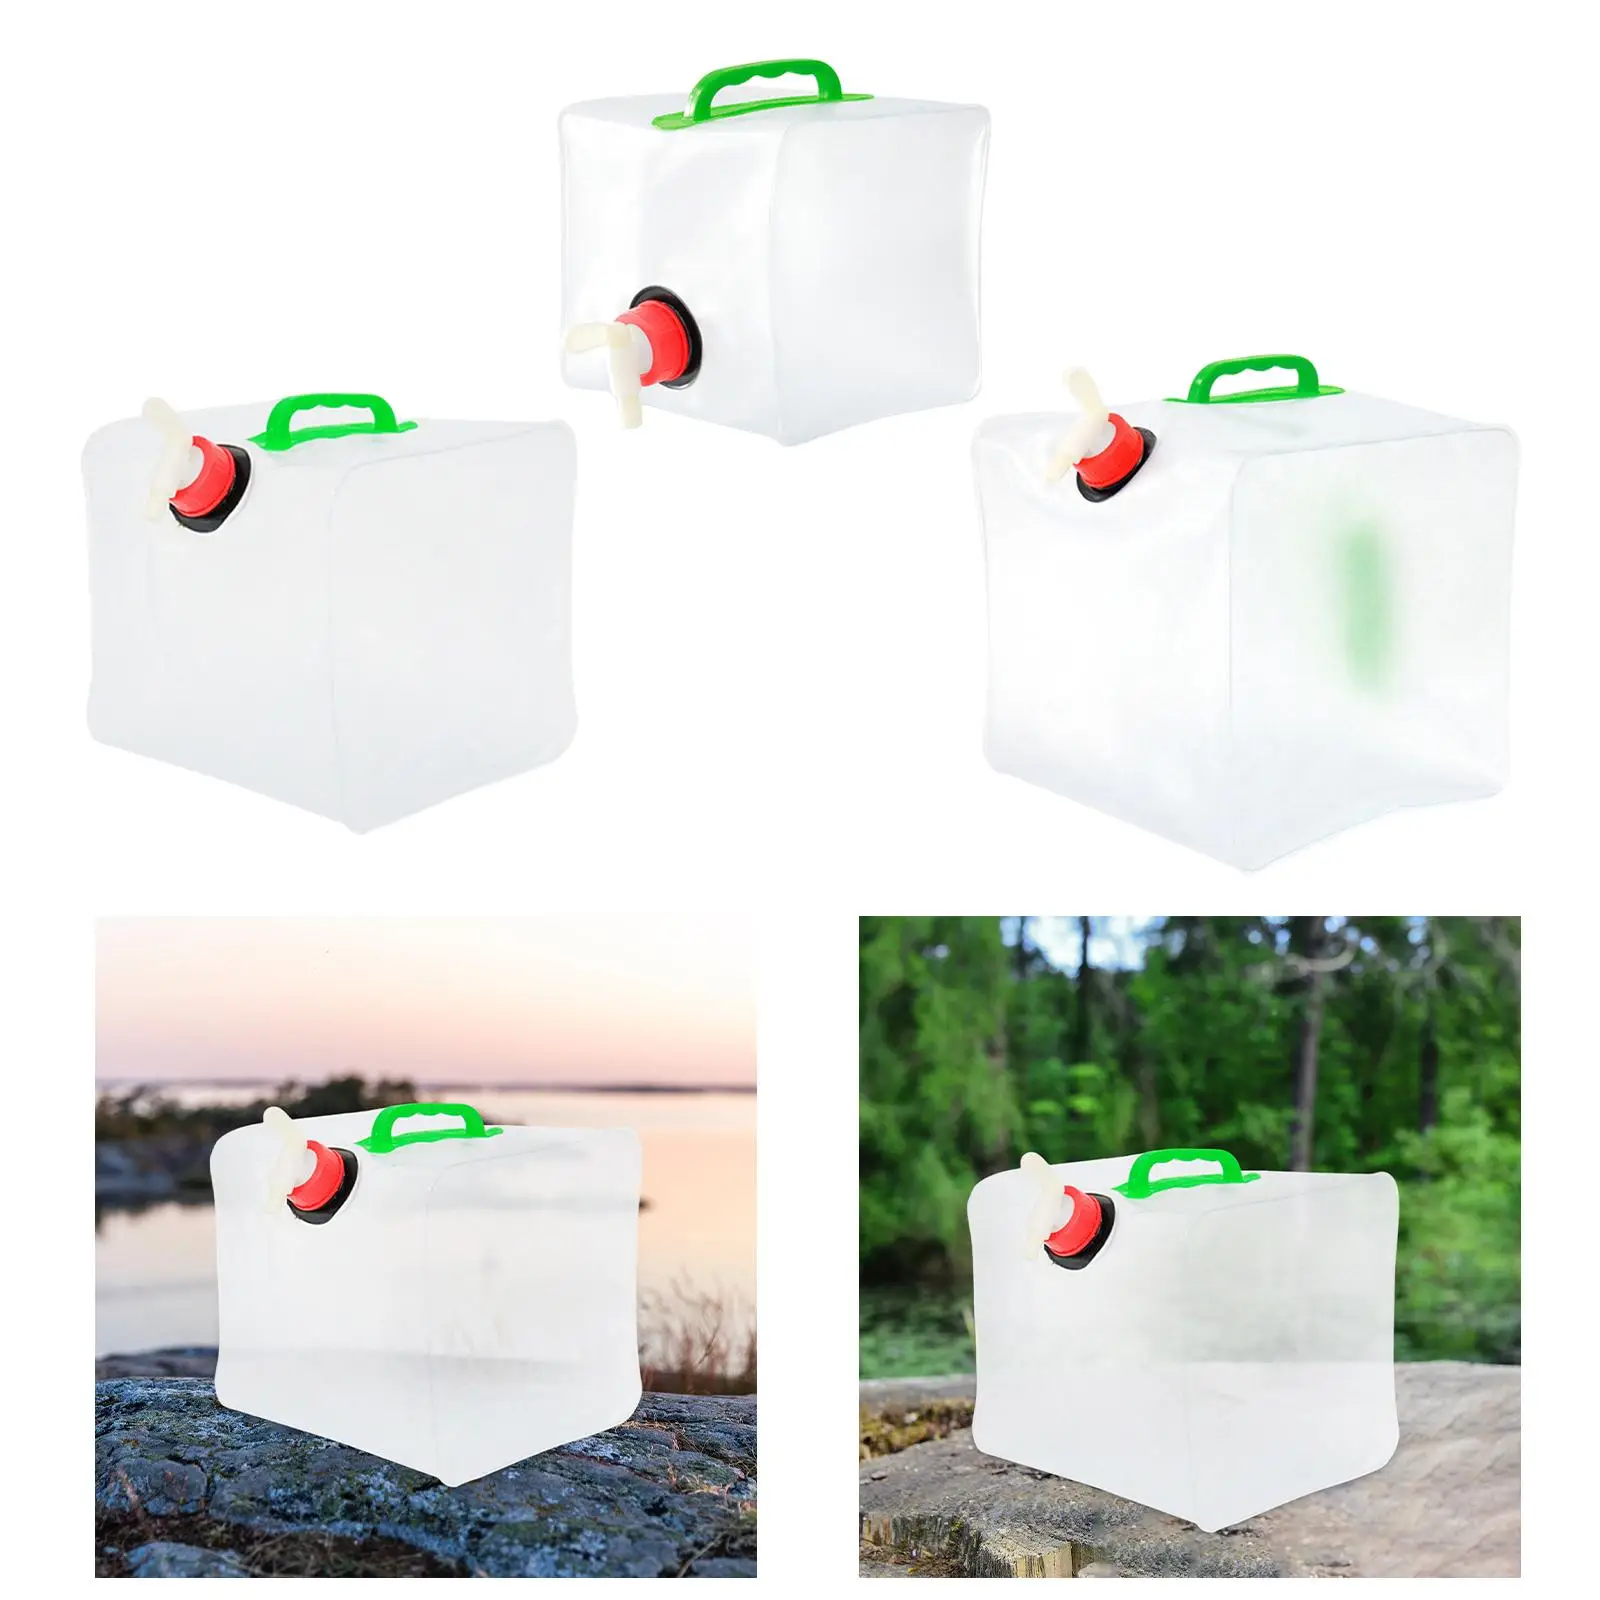 Water Storage Jug Water Bucket Drinking Collapsible Water Container Bag Water Bottle Carrier Water Tank for Cooking Bathing Car